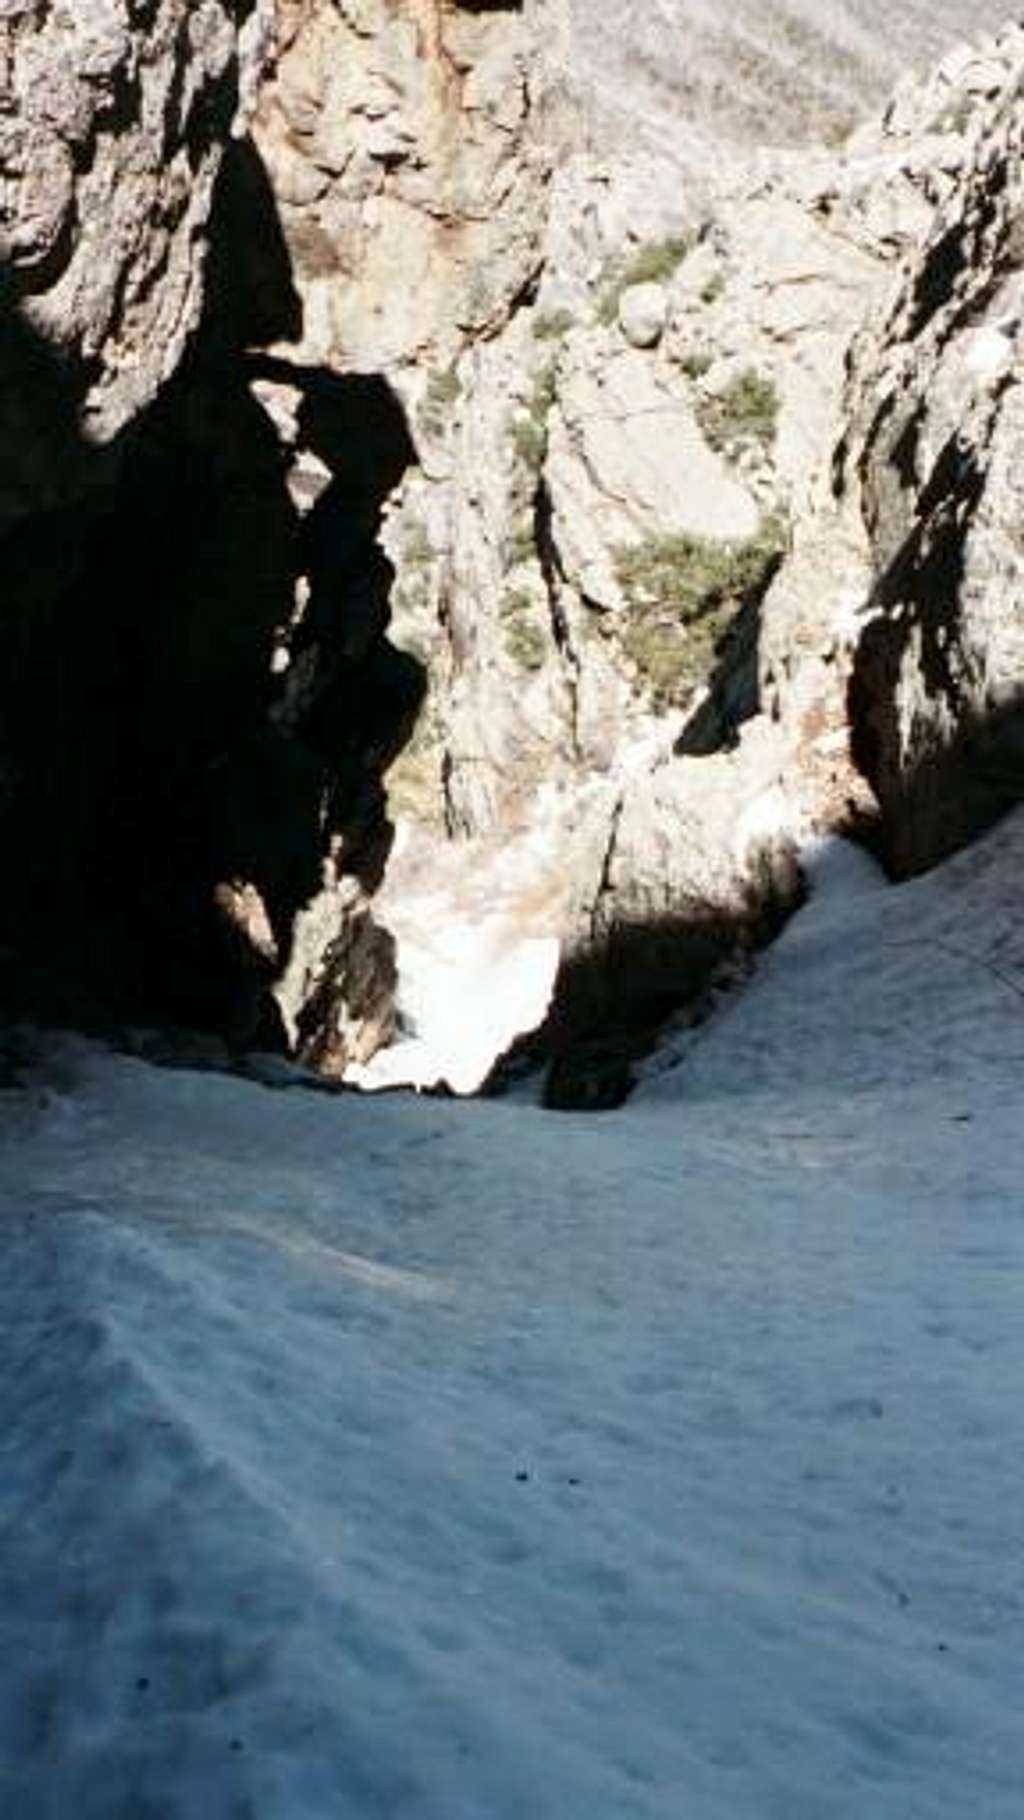 The snow filled Scree Chute